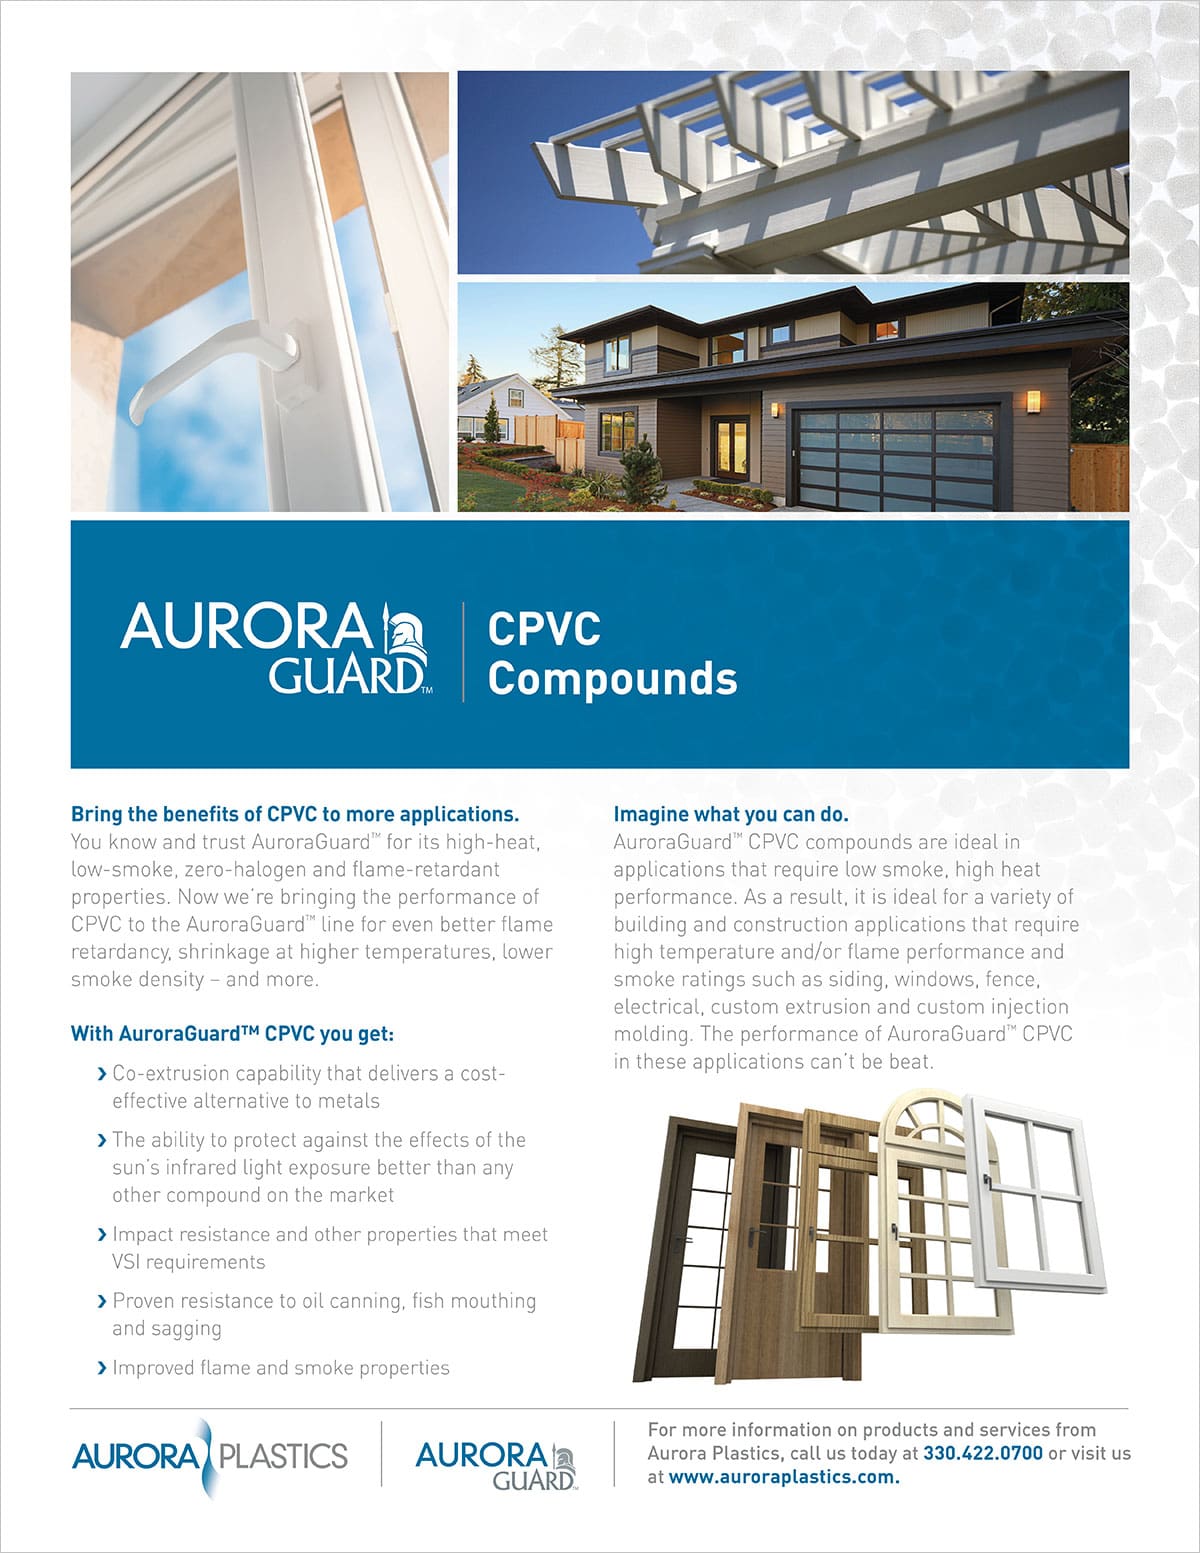 Aurora Plastics CPVC compounds are highly impact resistant and weatherable, they meet AAMA (American Architectural Manufacturers Association) standards for outdoor performance for applications like windows, doors, siding & garage doors. These compounds are available in powder or pellet form and can be processed through extrusion. They are available in a wide range of colors for added application flexibility.